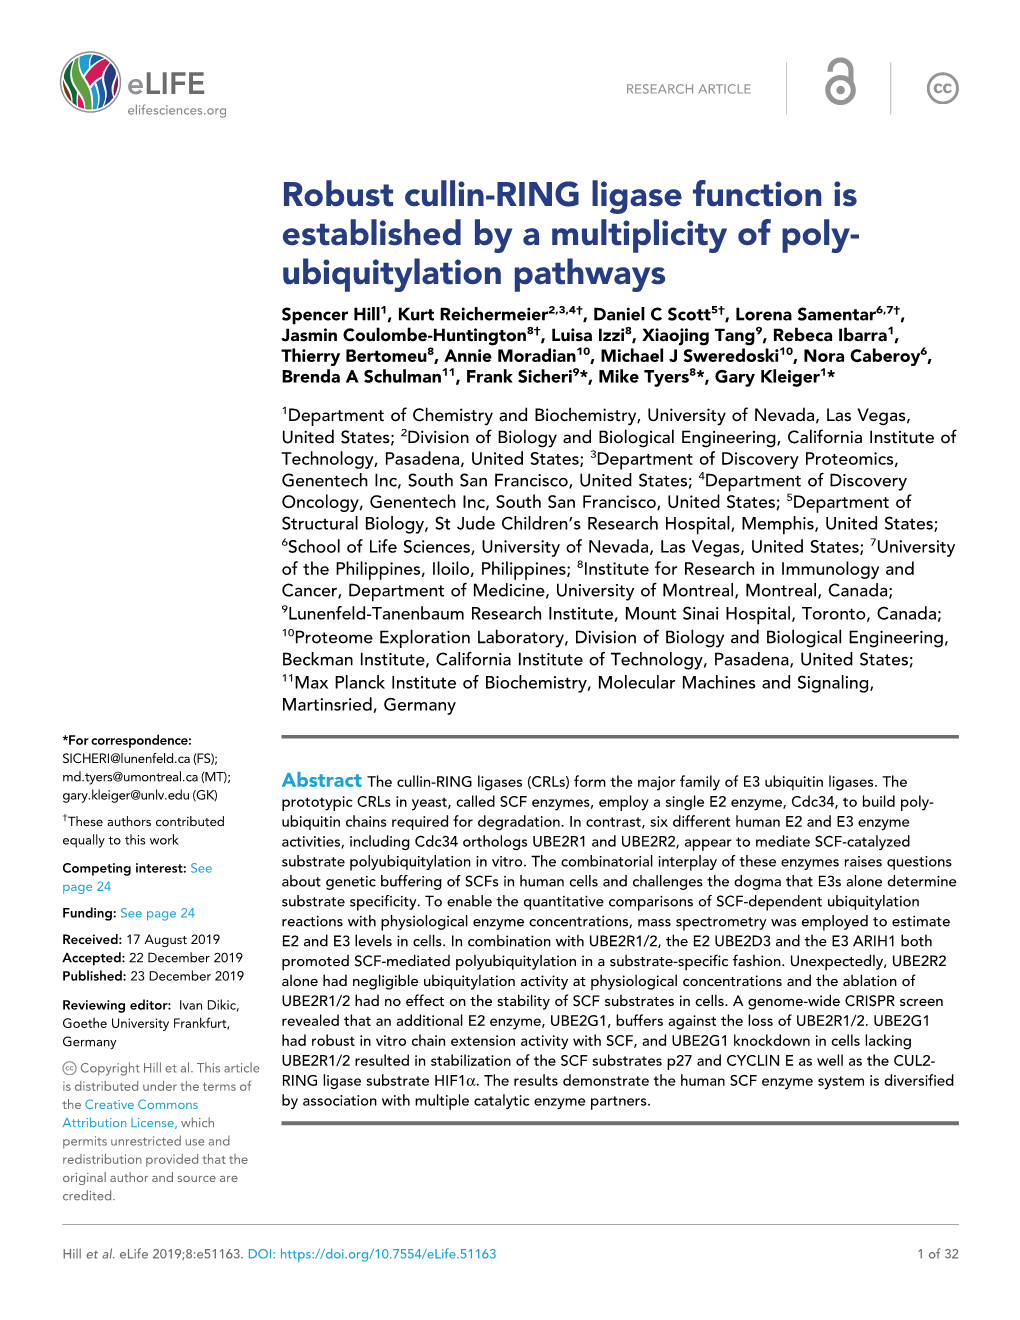 Robust Cullin-RING Ligase Function Is Established by A